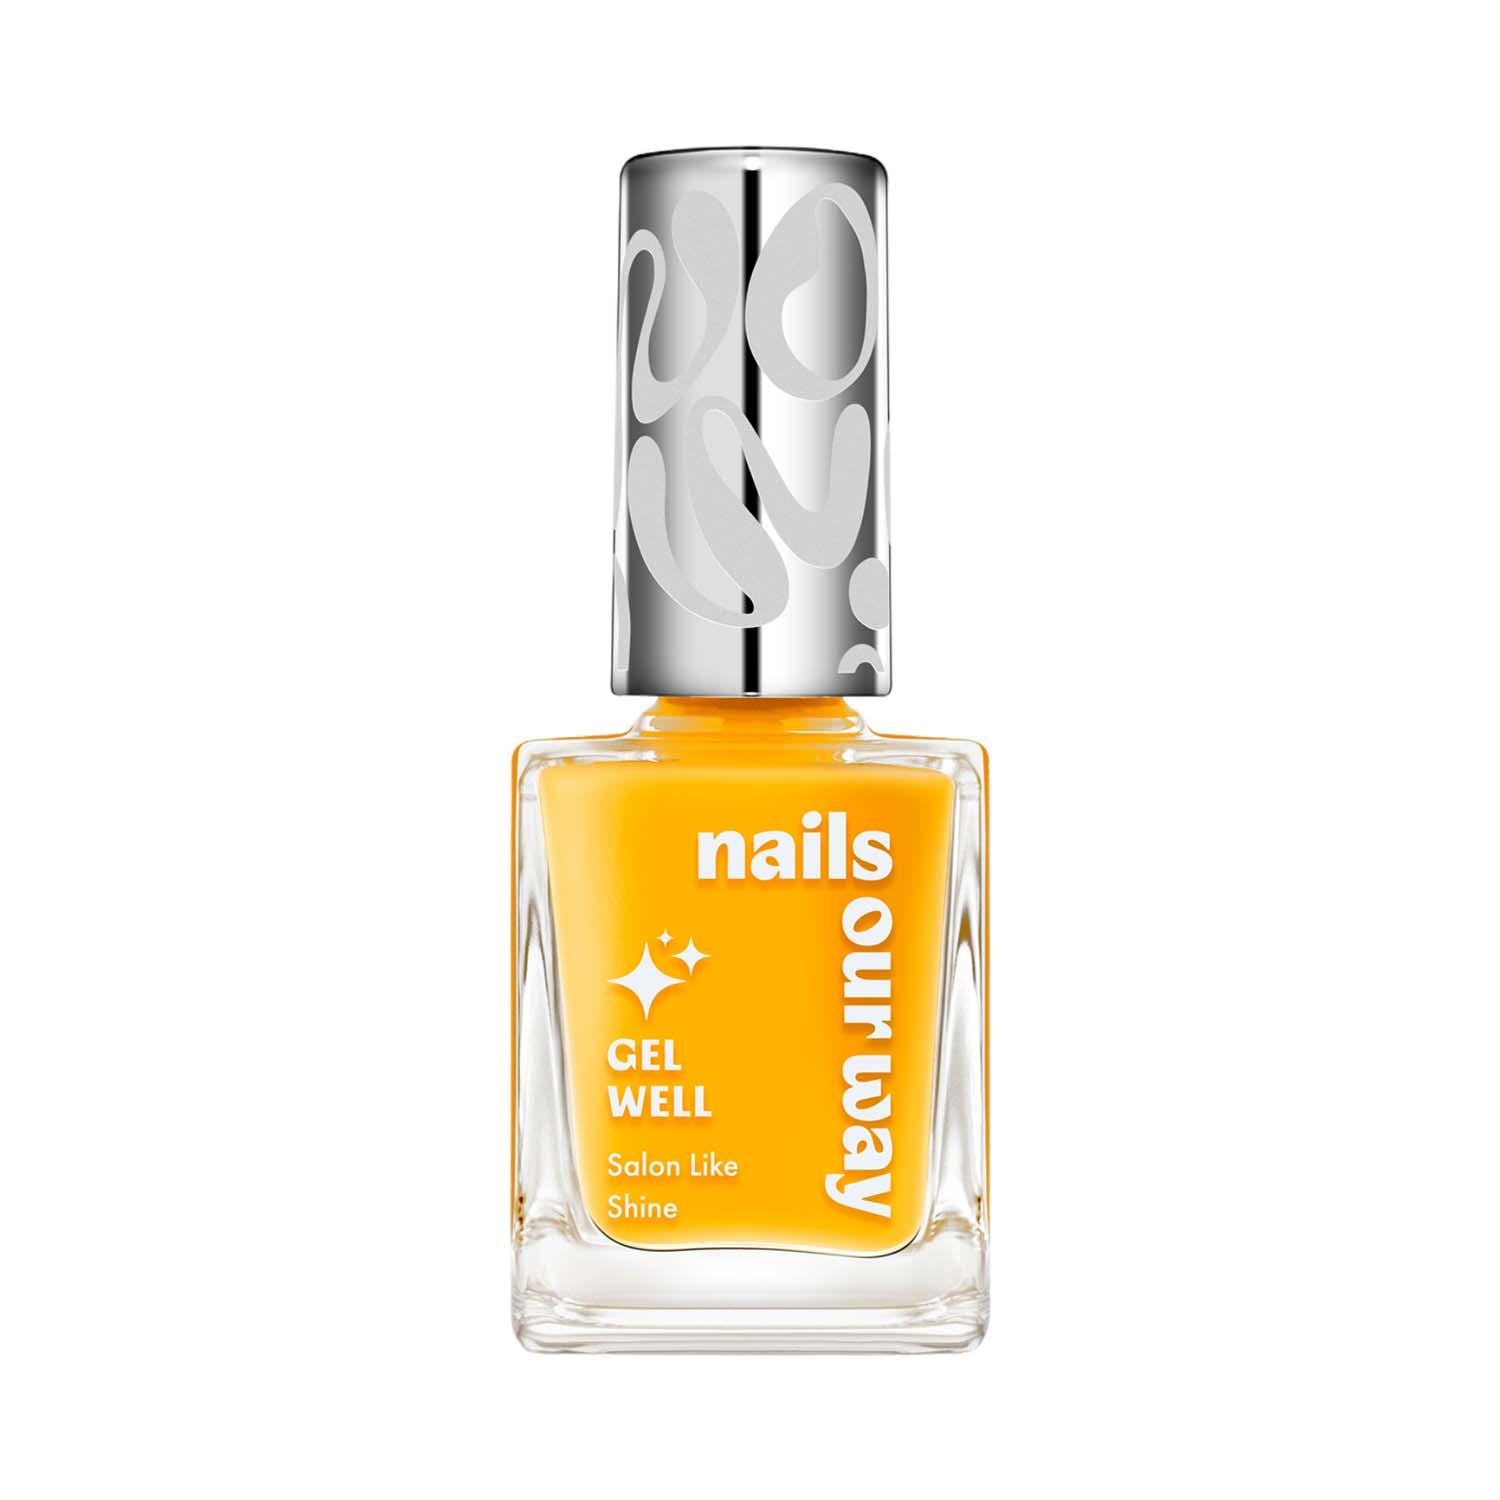 Nails Our Way | Nails Our Way Gel Well Nail Enamel - 302 Sunny (10 ml)